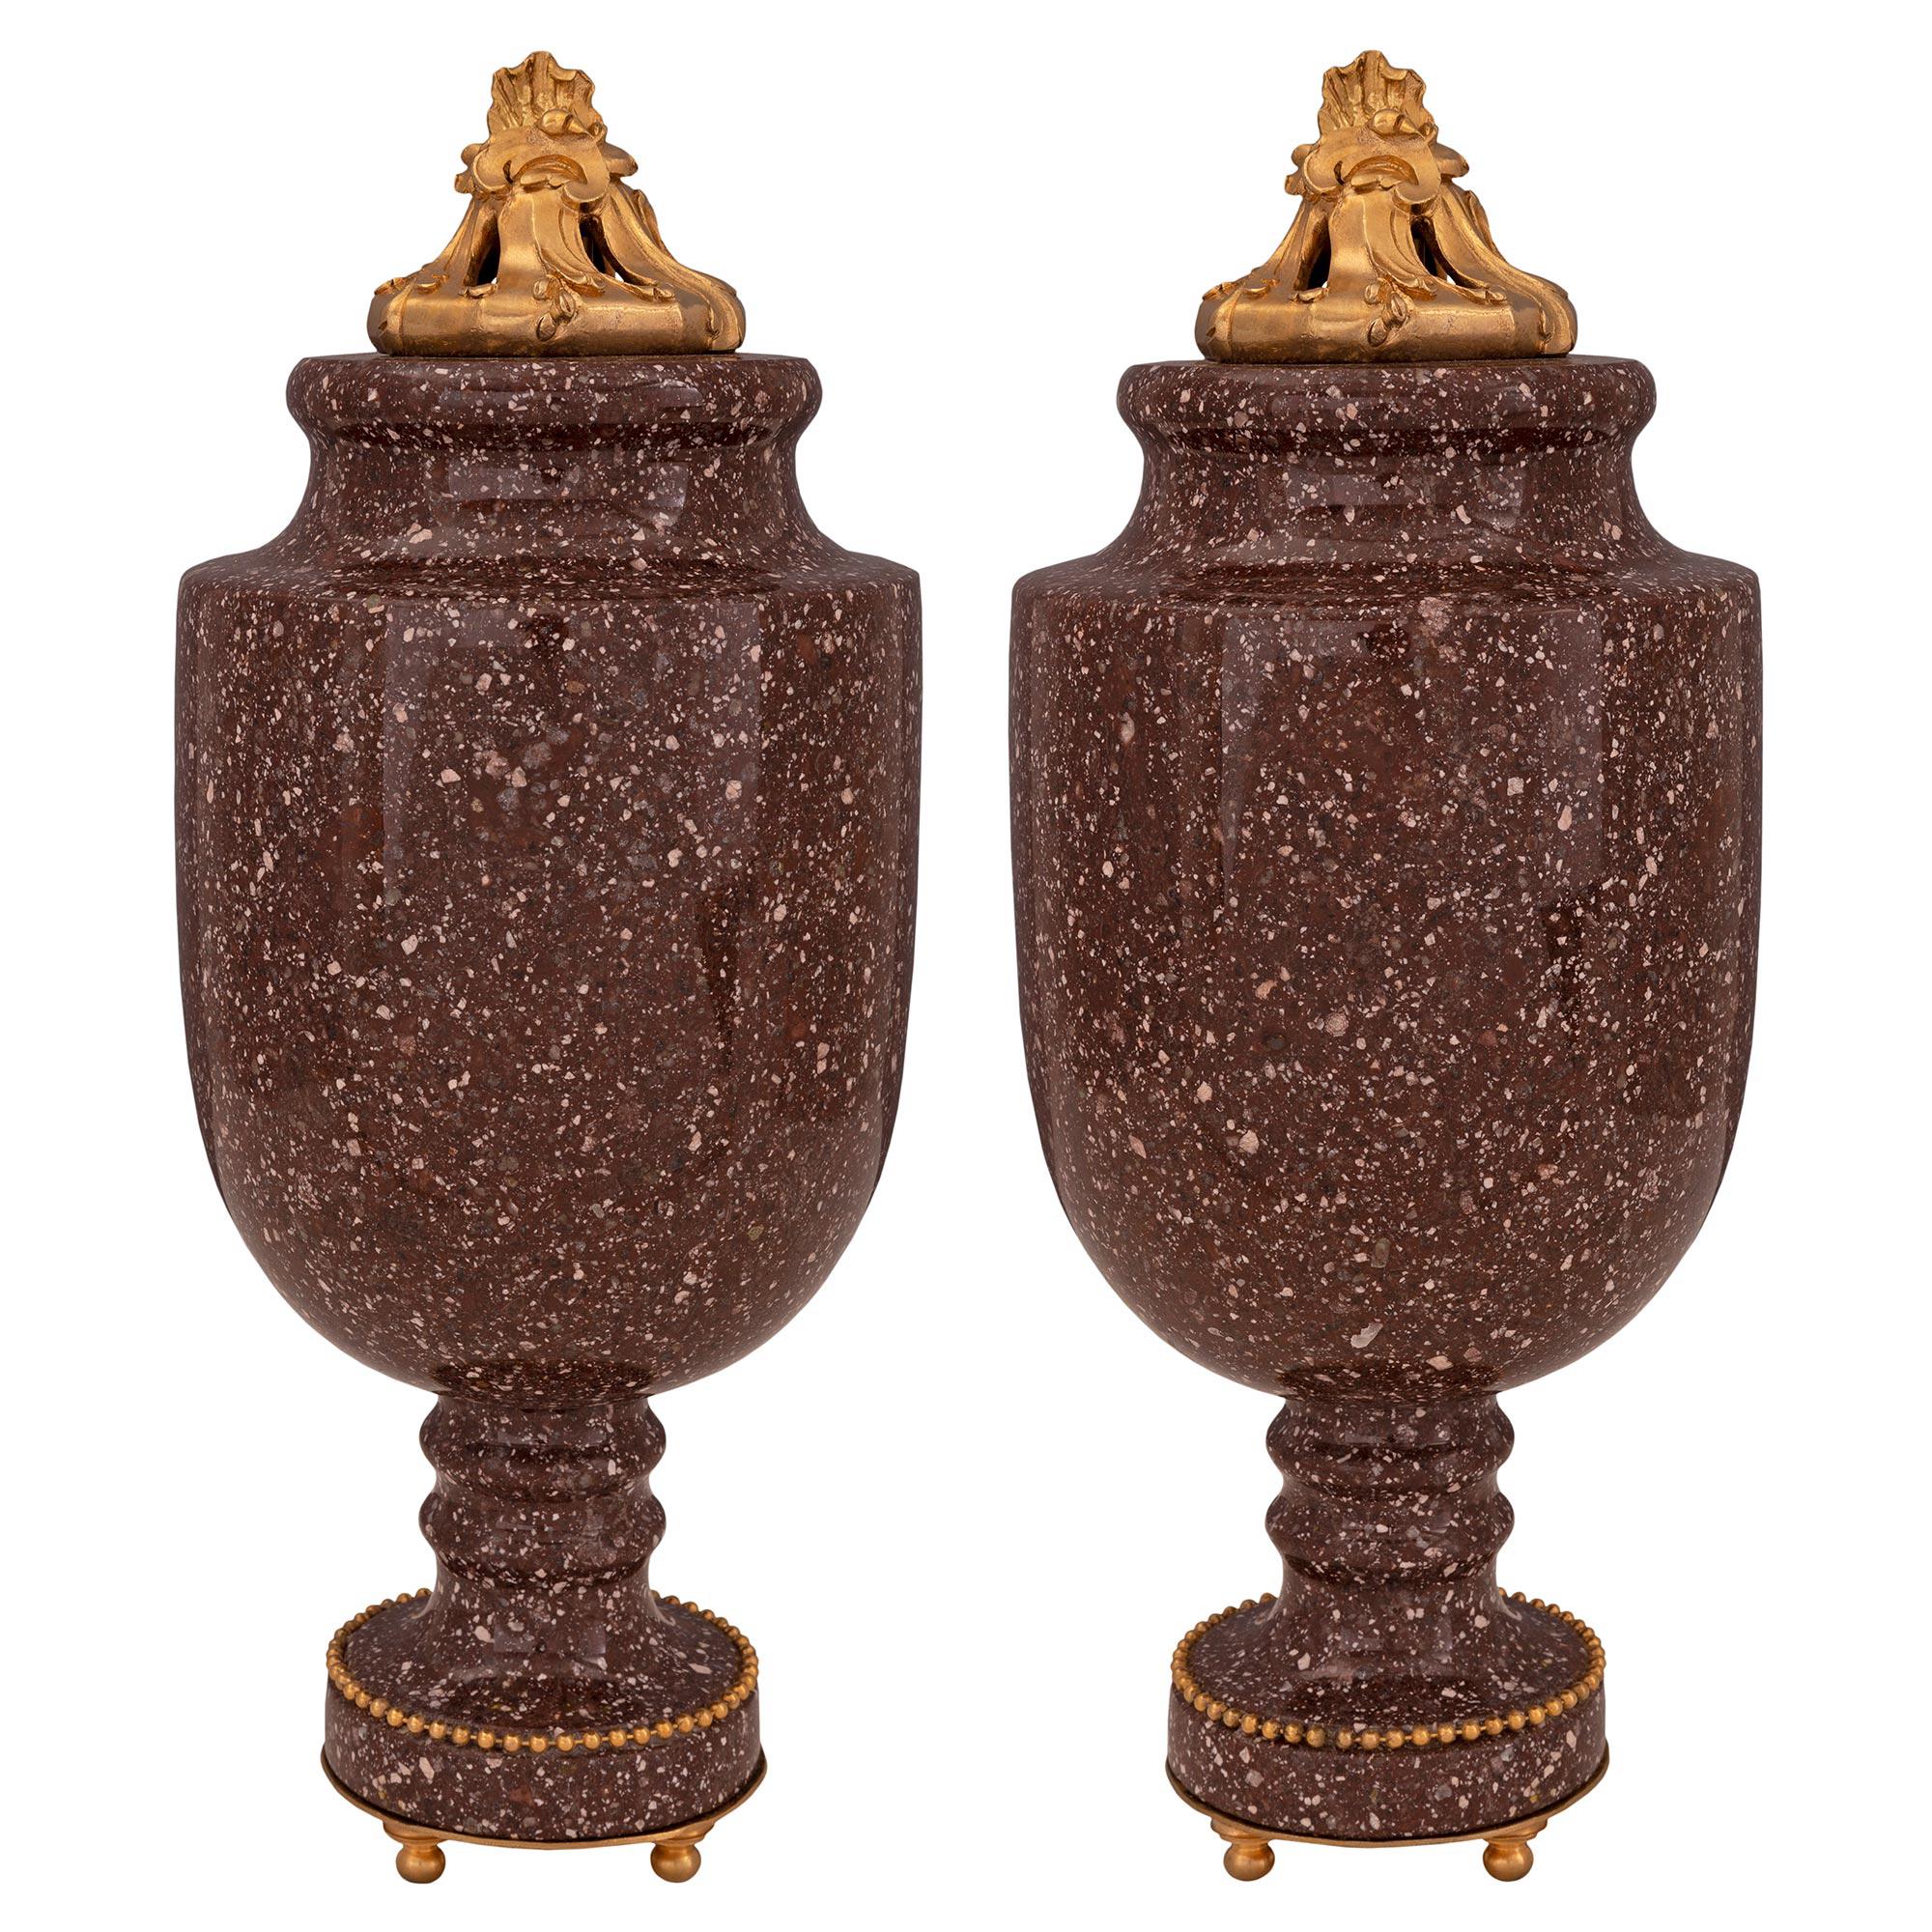 Pair of French 19th Century Neoclassical St. Porphyry and Ormolu Lidded Urns